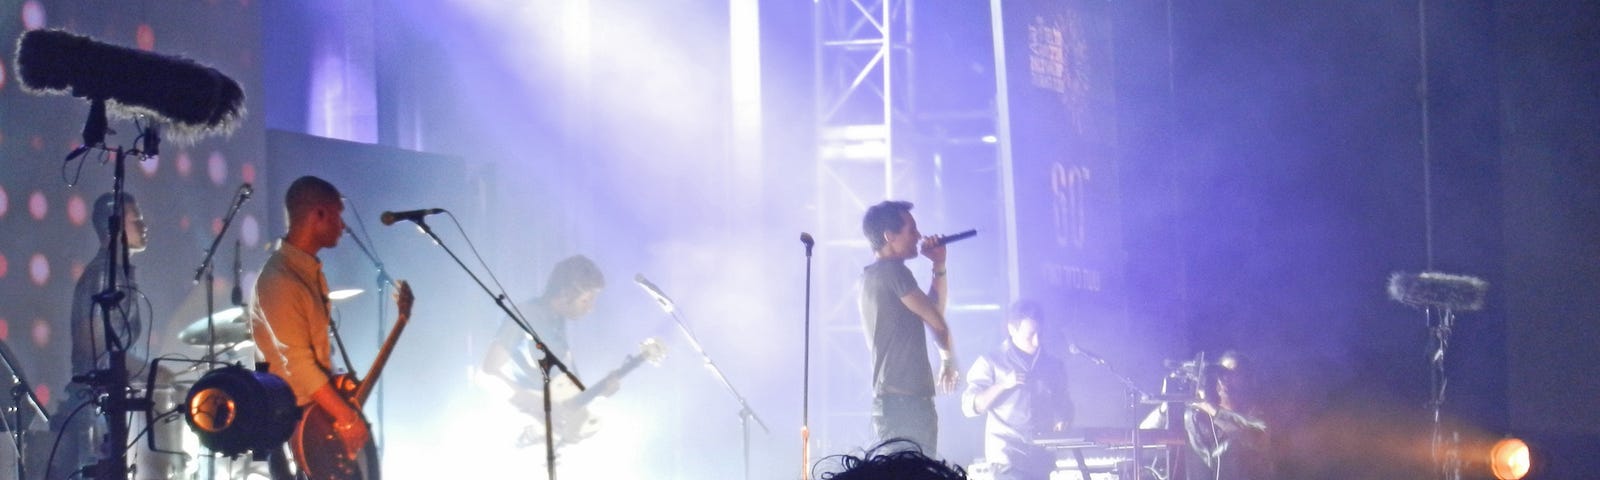 Concert stage — Base player on the left side of the stage and the singer is in the middle holding a microphone up to his mouth. Fans are in the foreground and bright white lights are behind the band.